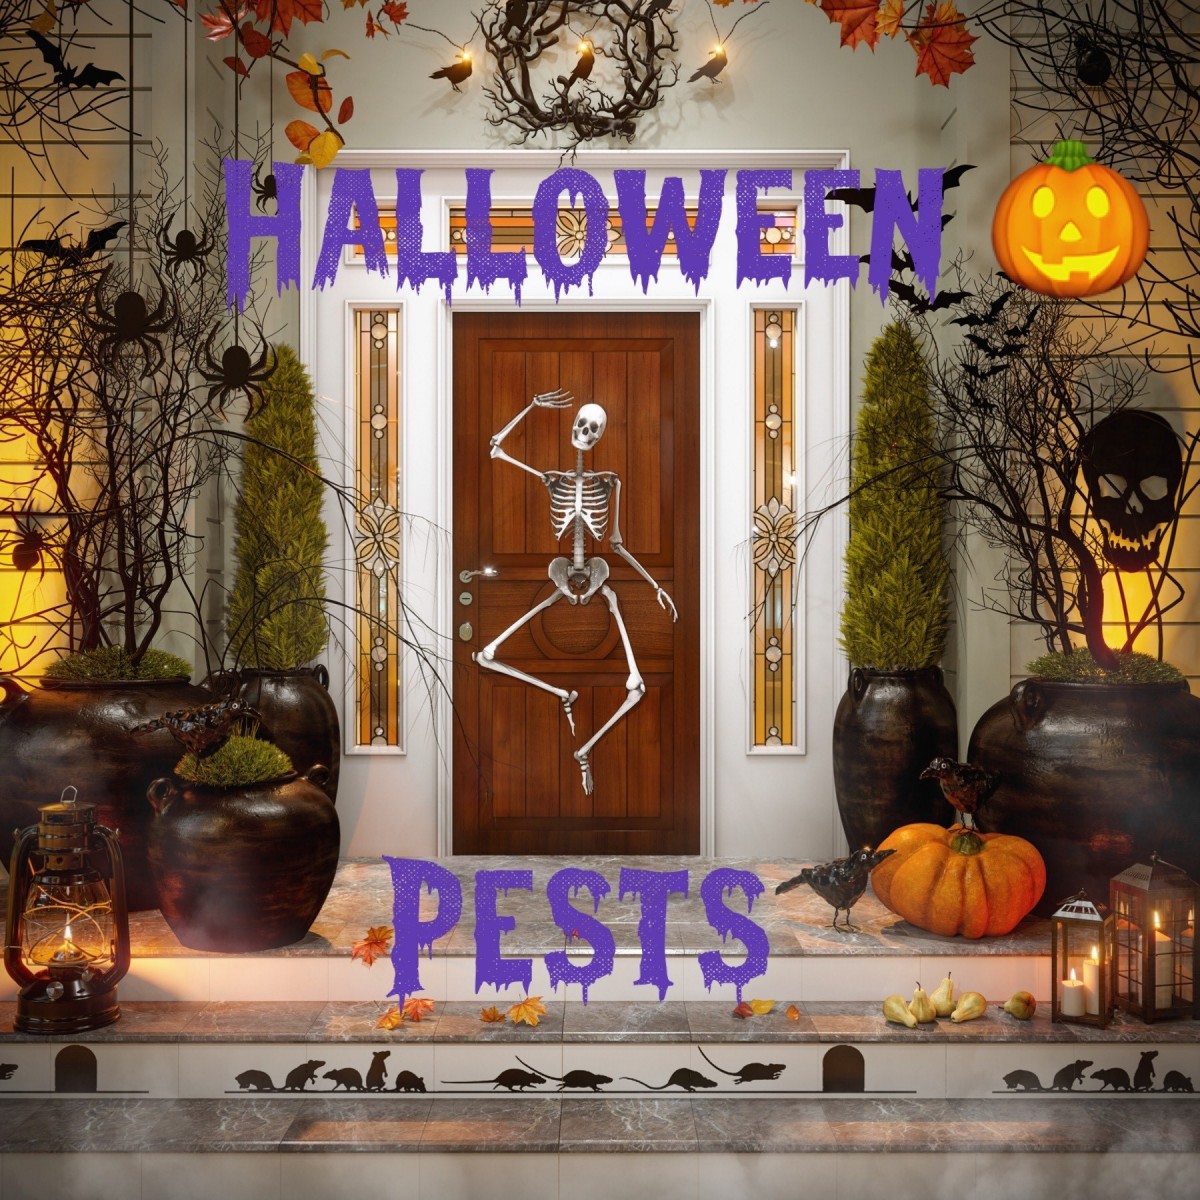 the front of a home dressed up forhalloween pests